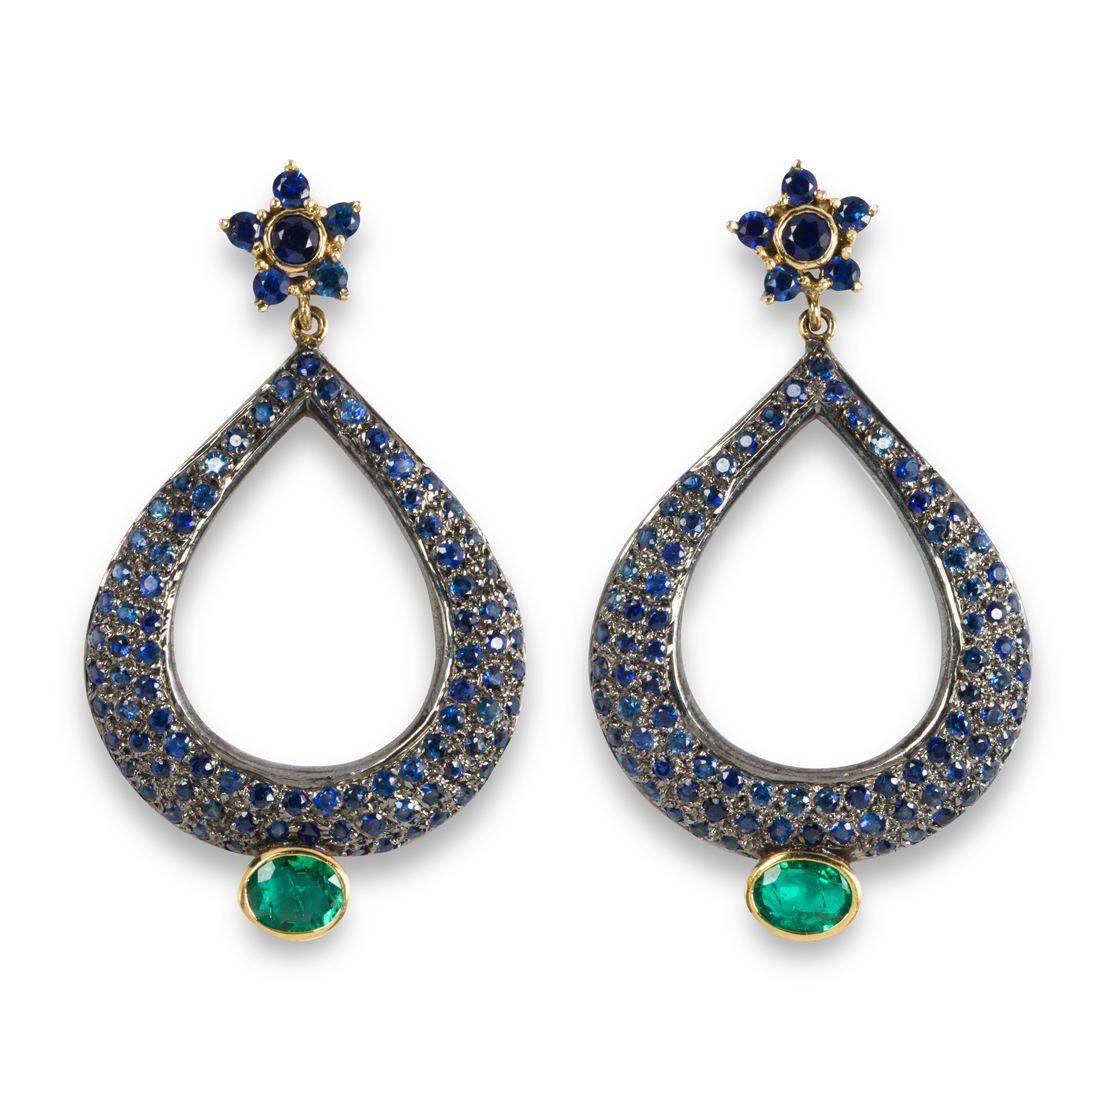 A PAIR OF SAPPHIRE AND EMERALD